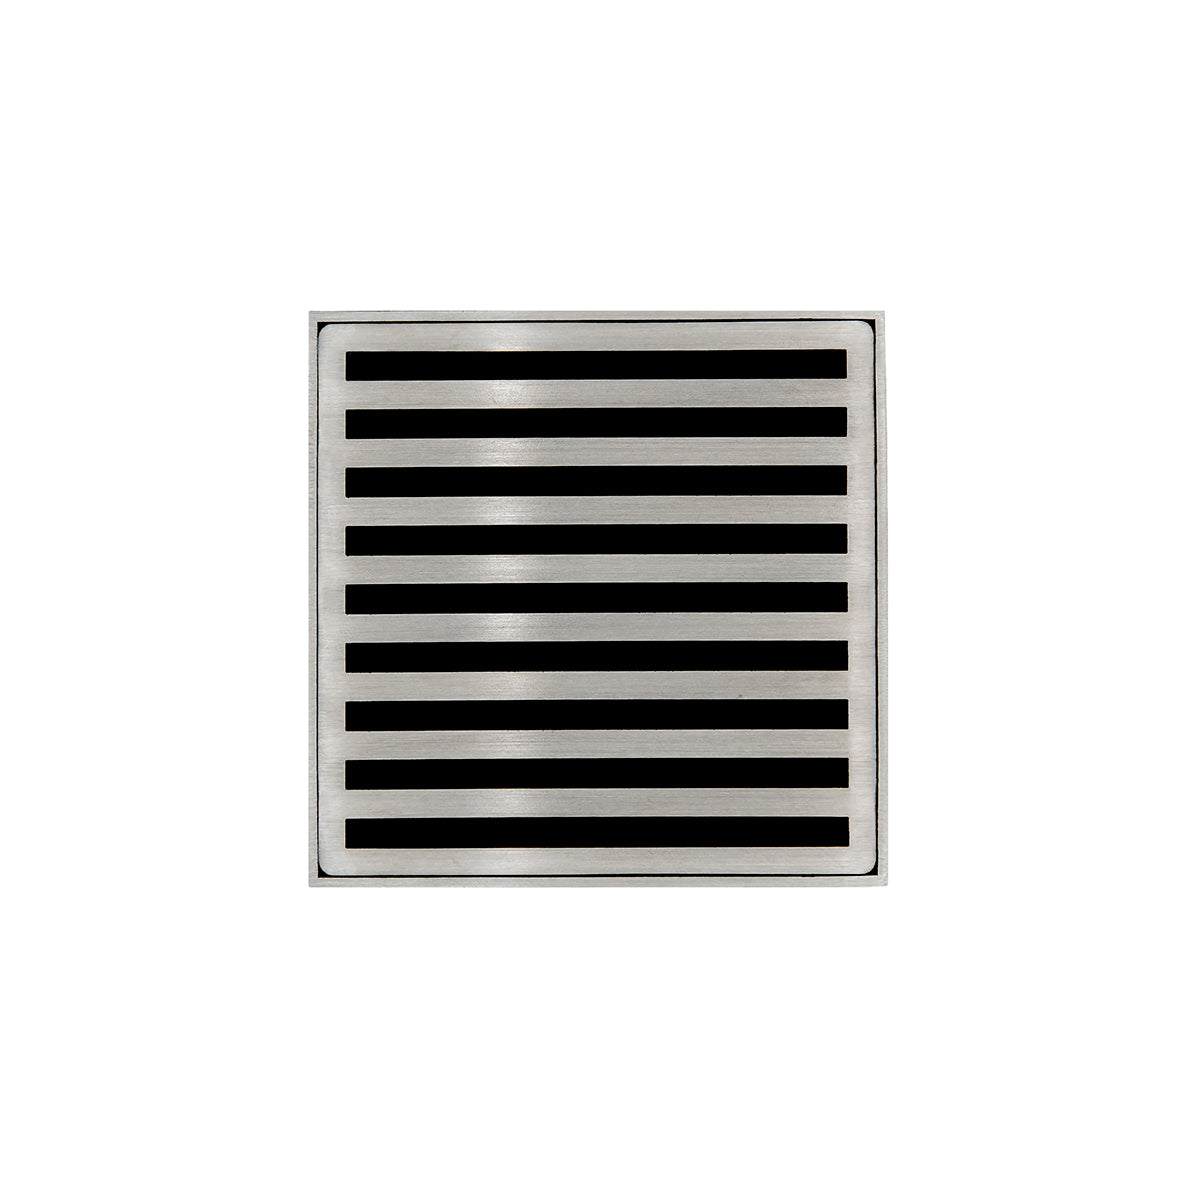 Infinity Drain 4" x 4" ND 4 Premium Center Drain Kit with Lines Pattern Decorative Plate with ABS Drain Body, 2" Outlet